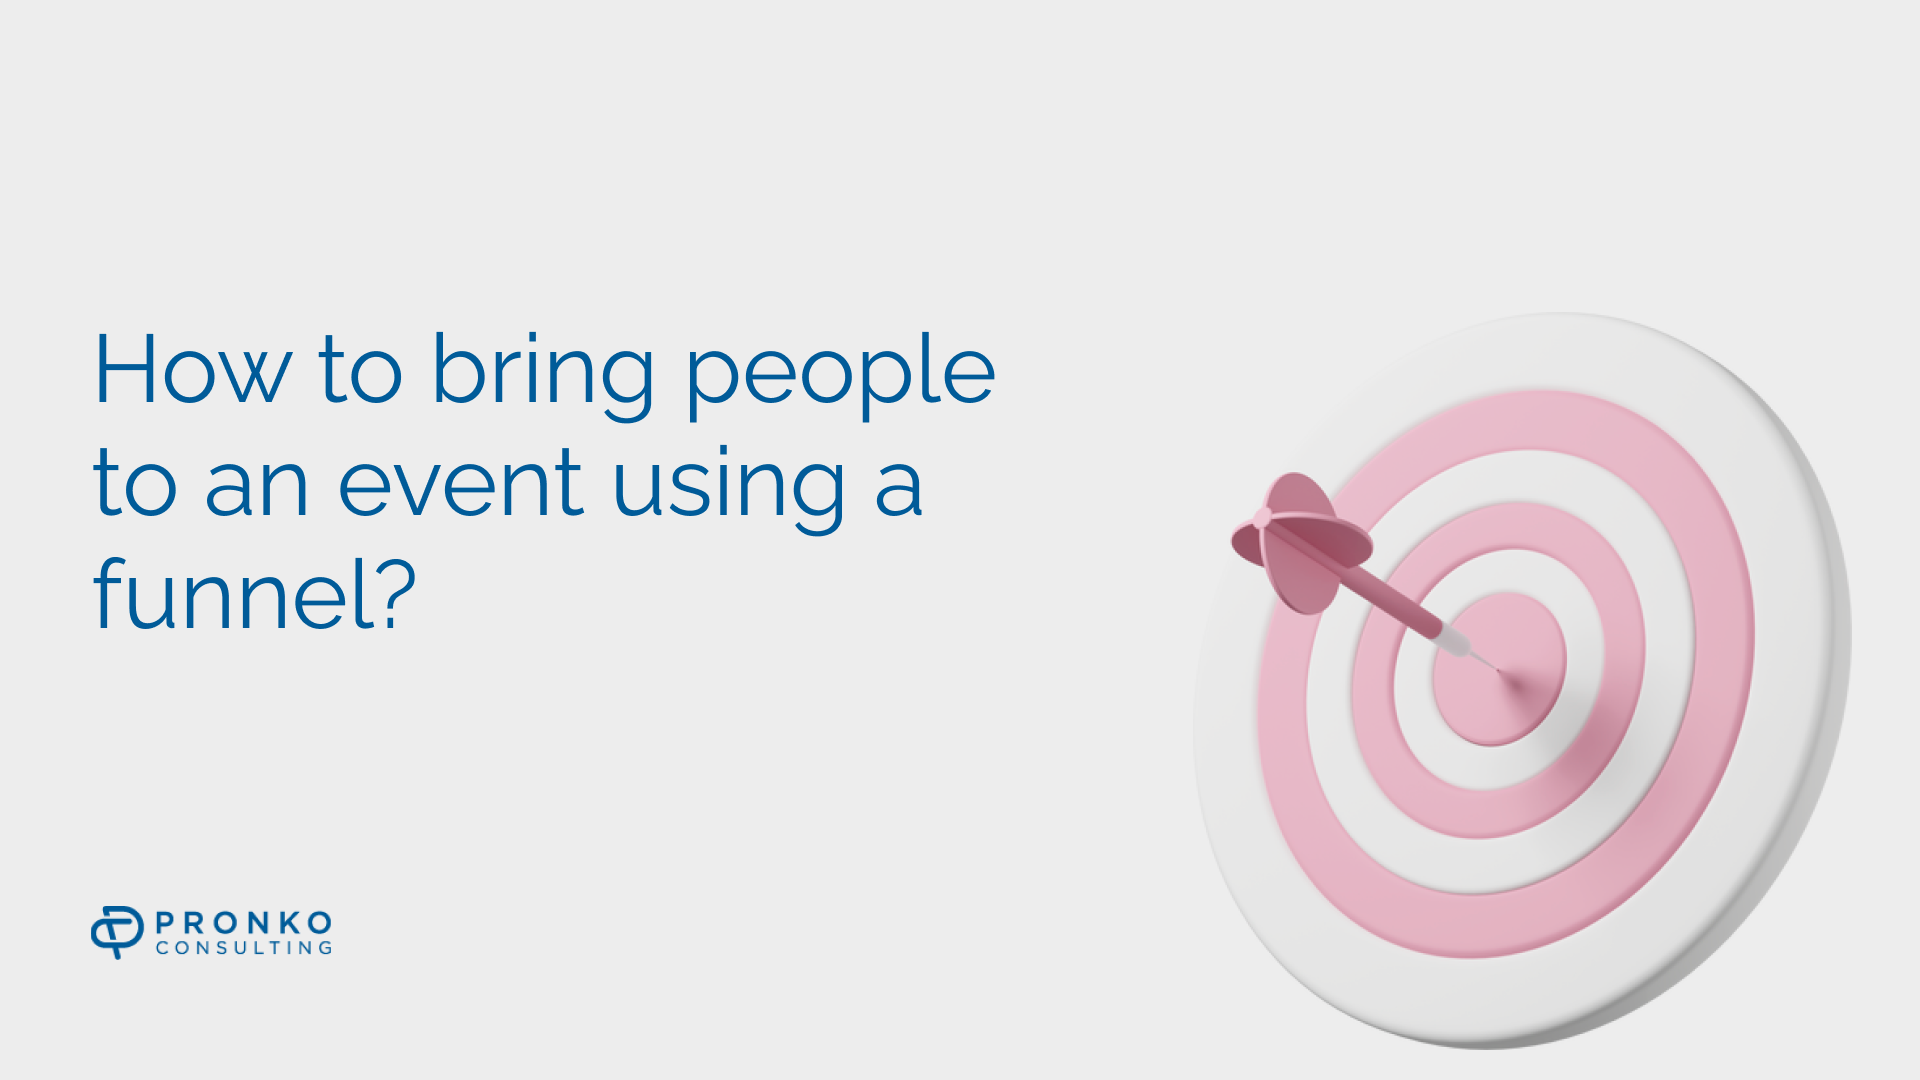 How to bring people to an event using a funnel